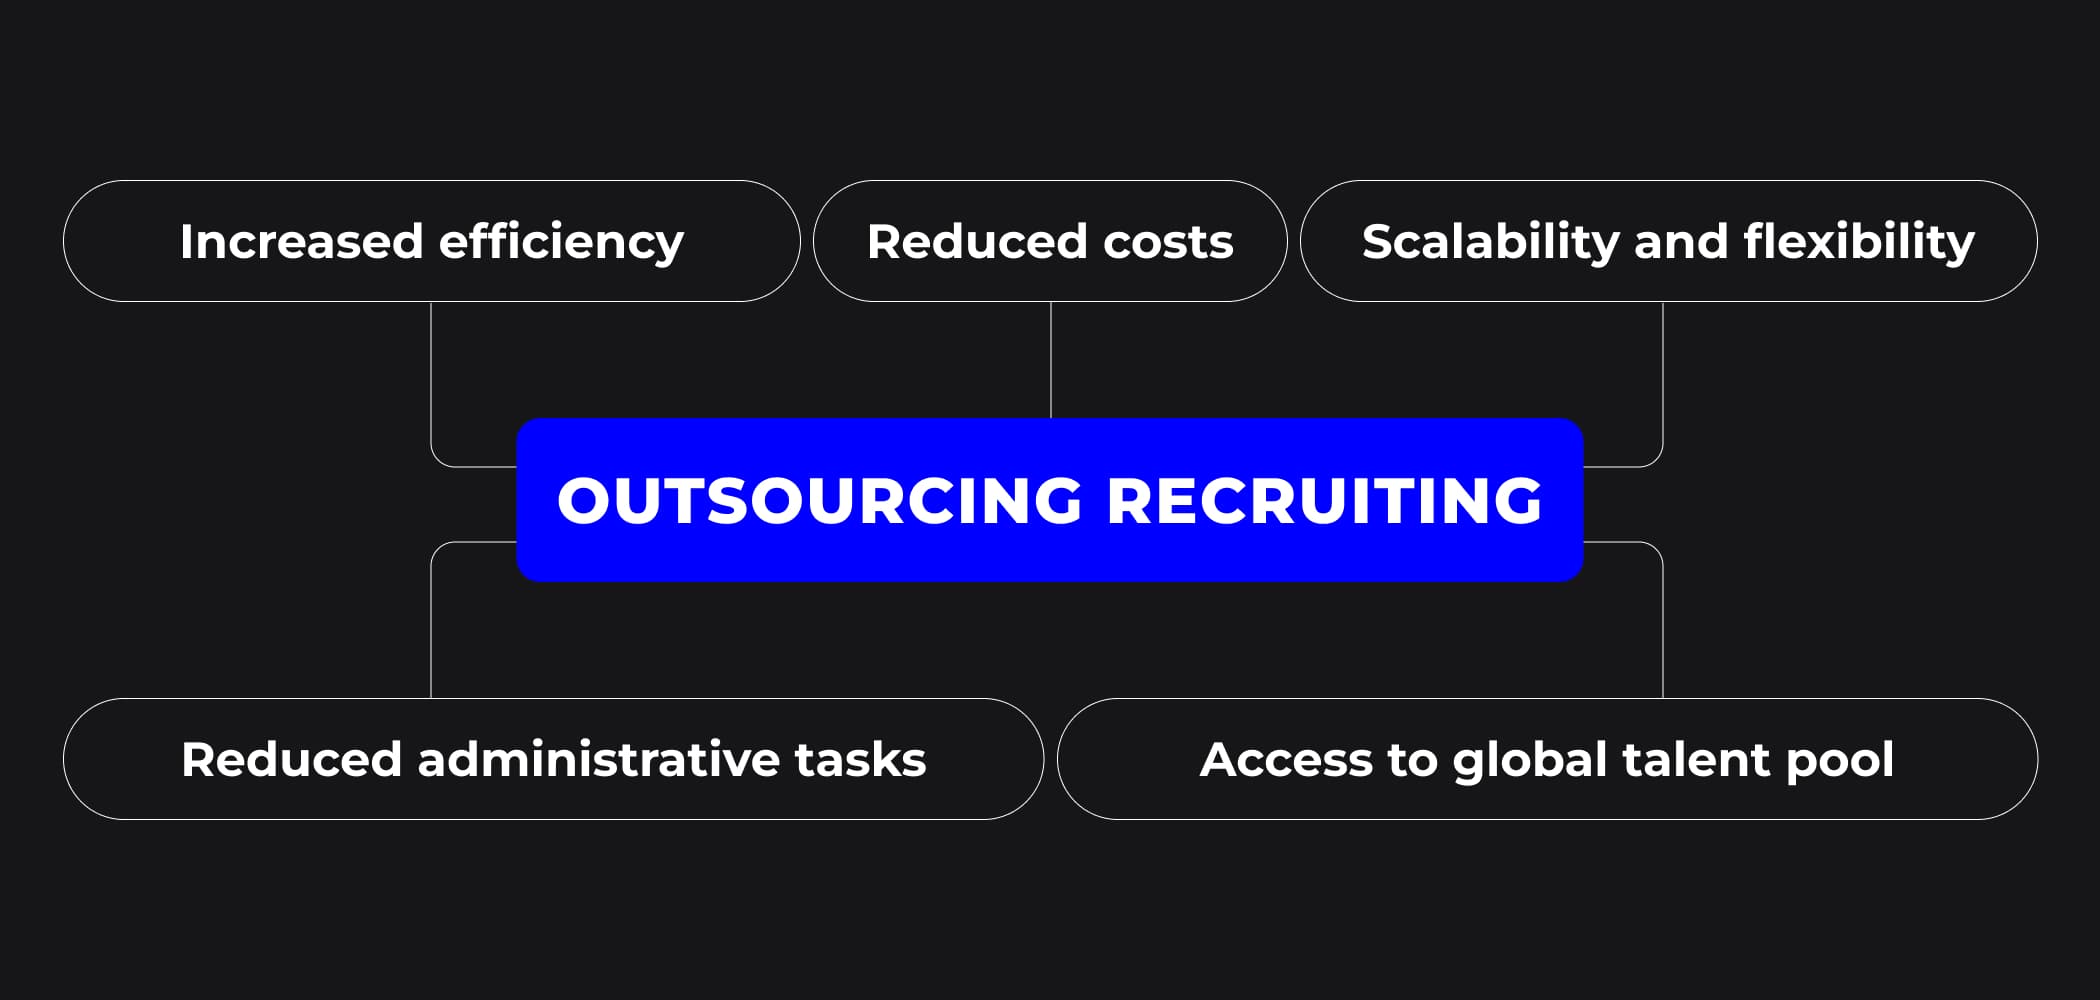 Outsourcing recruiting model